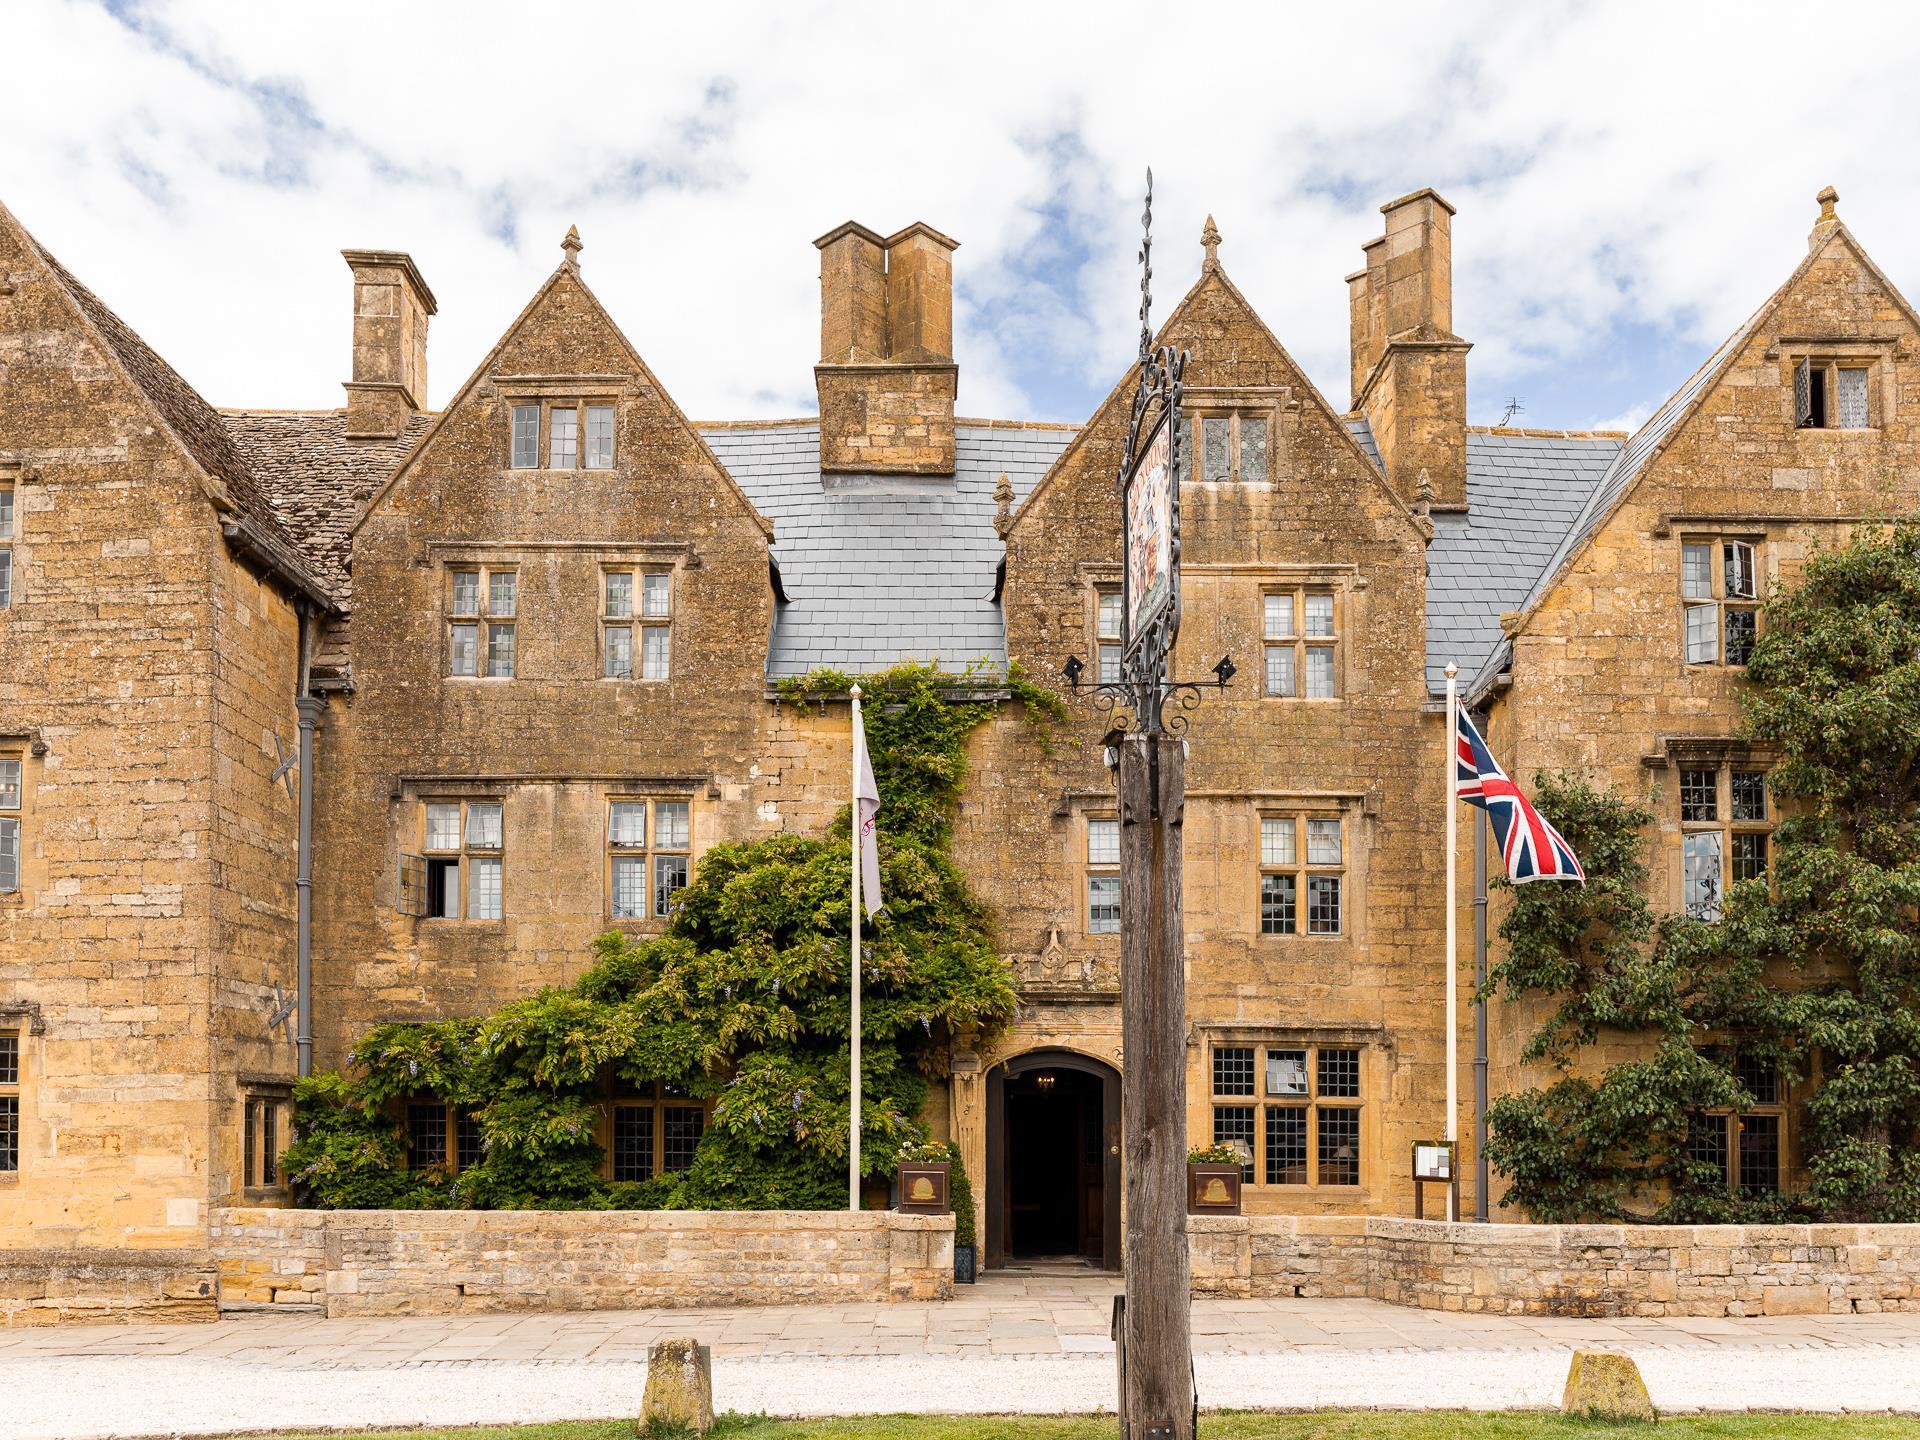 The Lygon Arms Hotel in Broadway, GB1